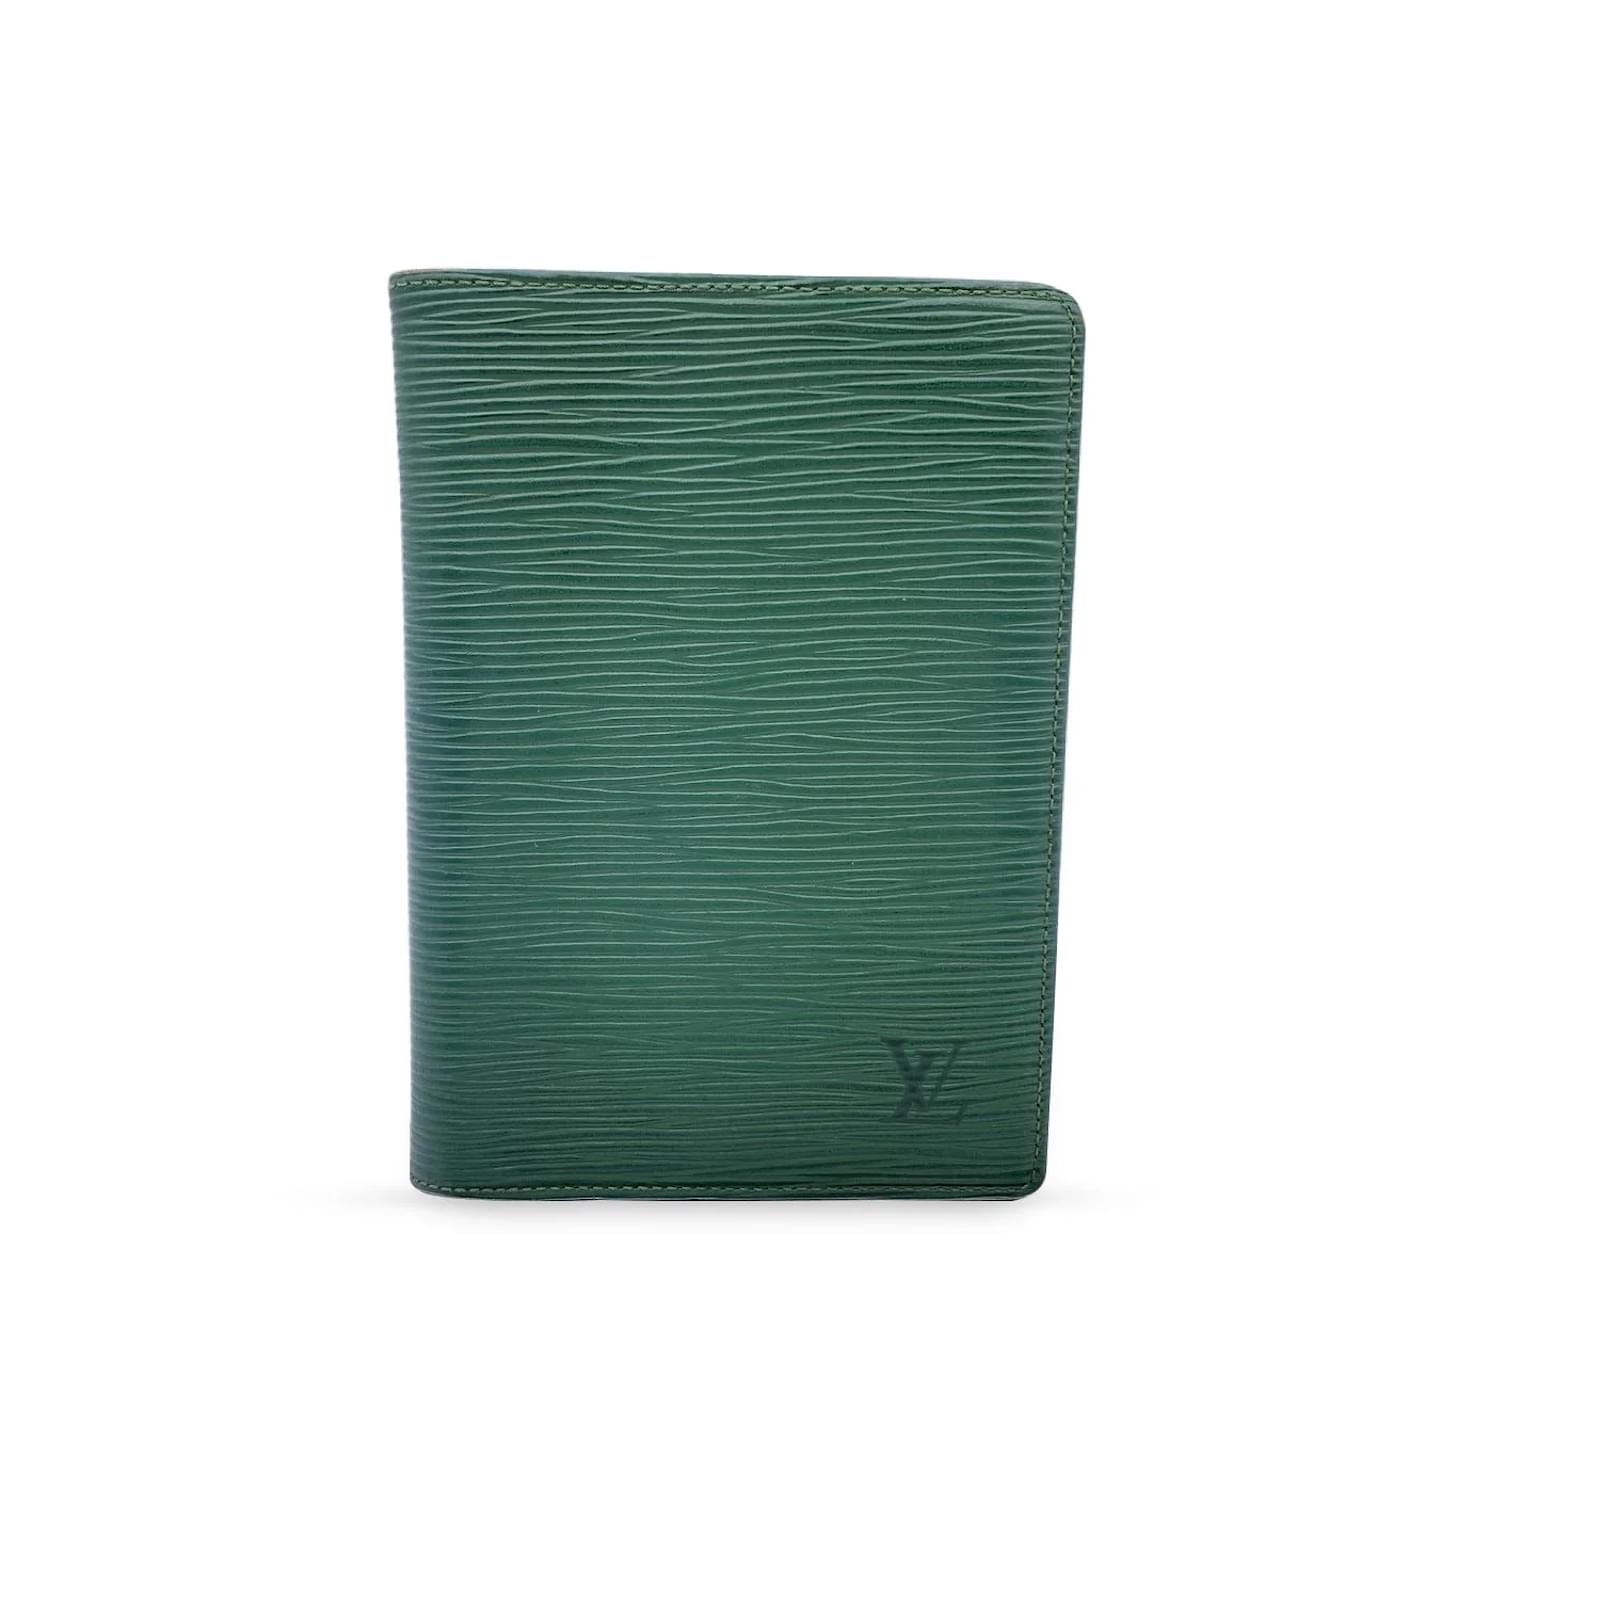 Louis Vuitton Portefeuille Zippy Green Leather Wallet (Pre-Owned)